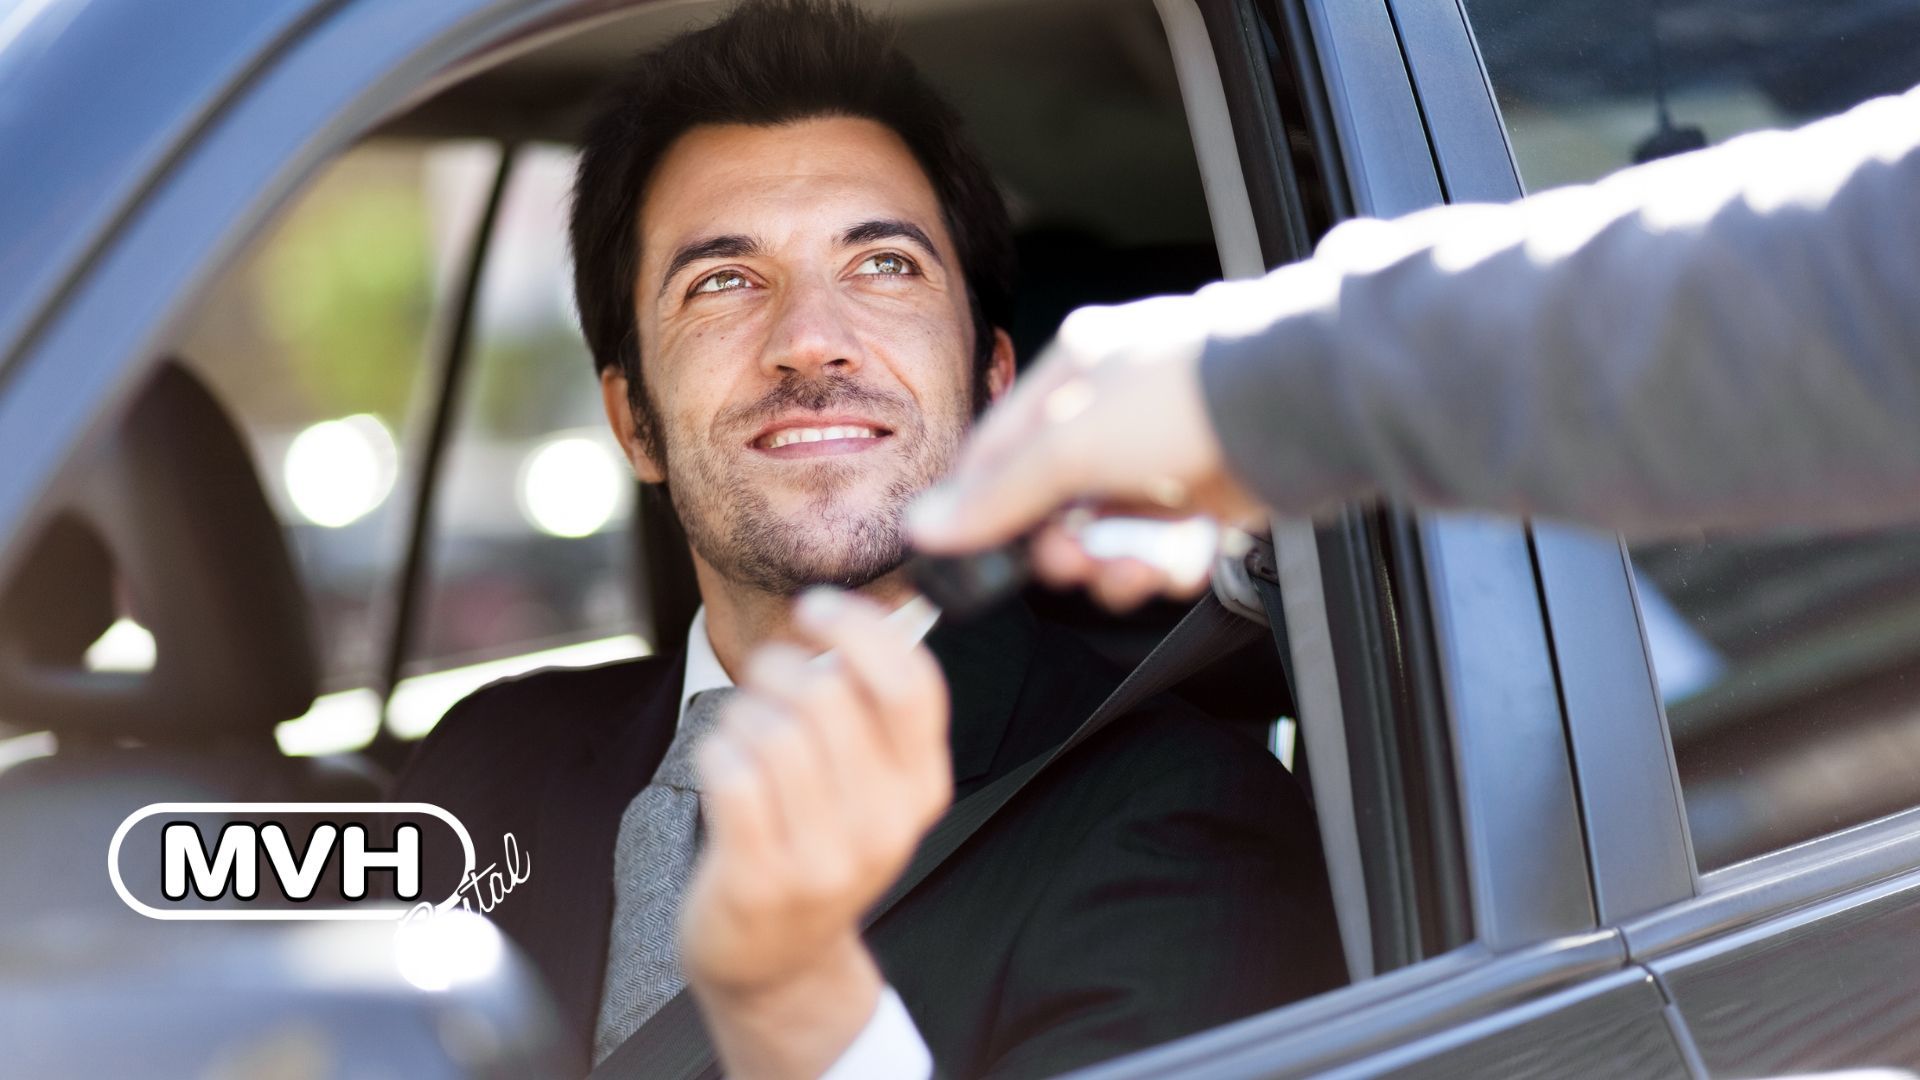 Is corporate vehicle rental cheaper than buying? Explore the benefits of short-term renting and make the right choice for your business needs.